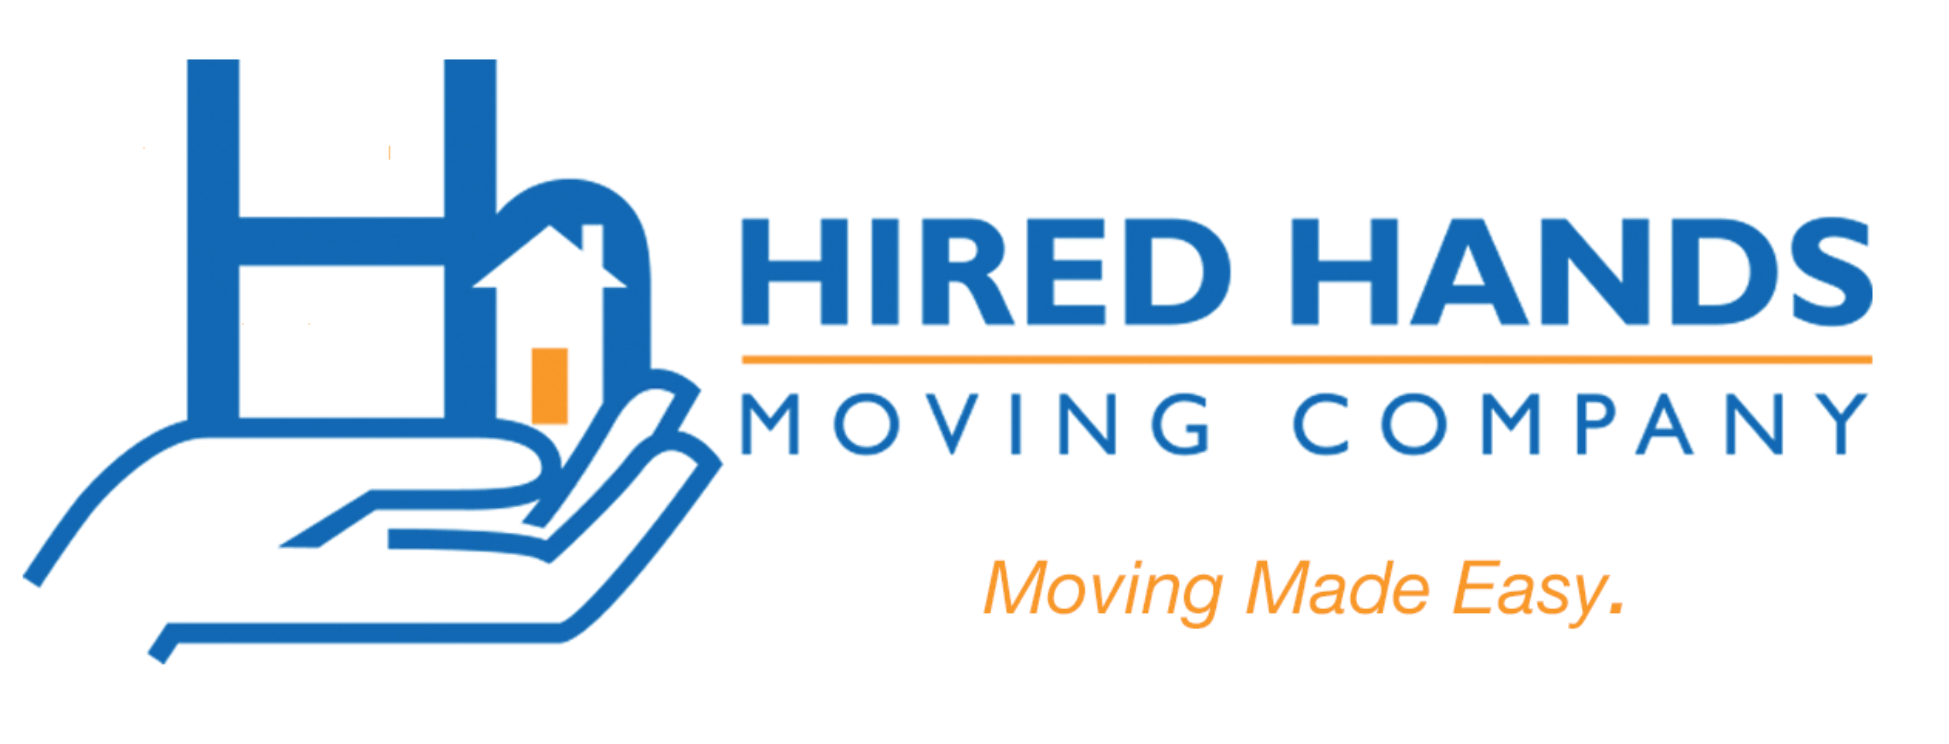 Hired Hands Moving Company